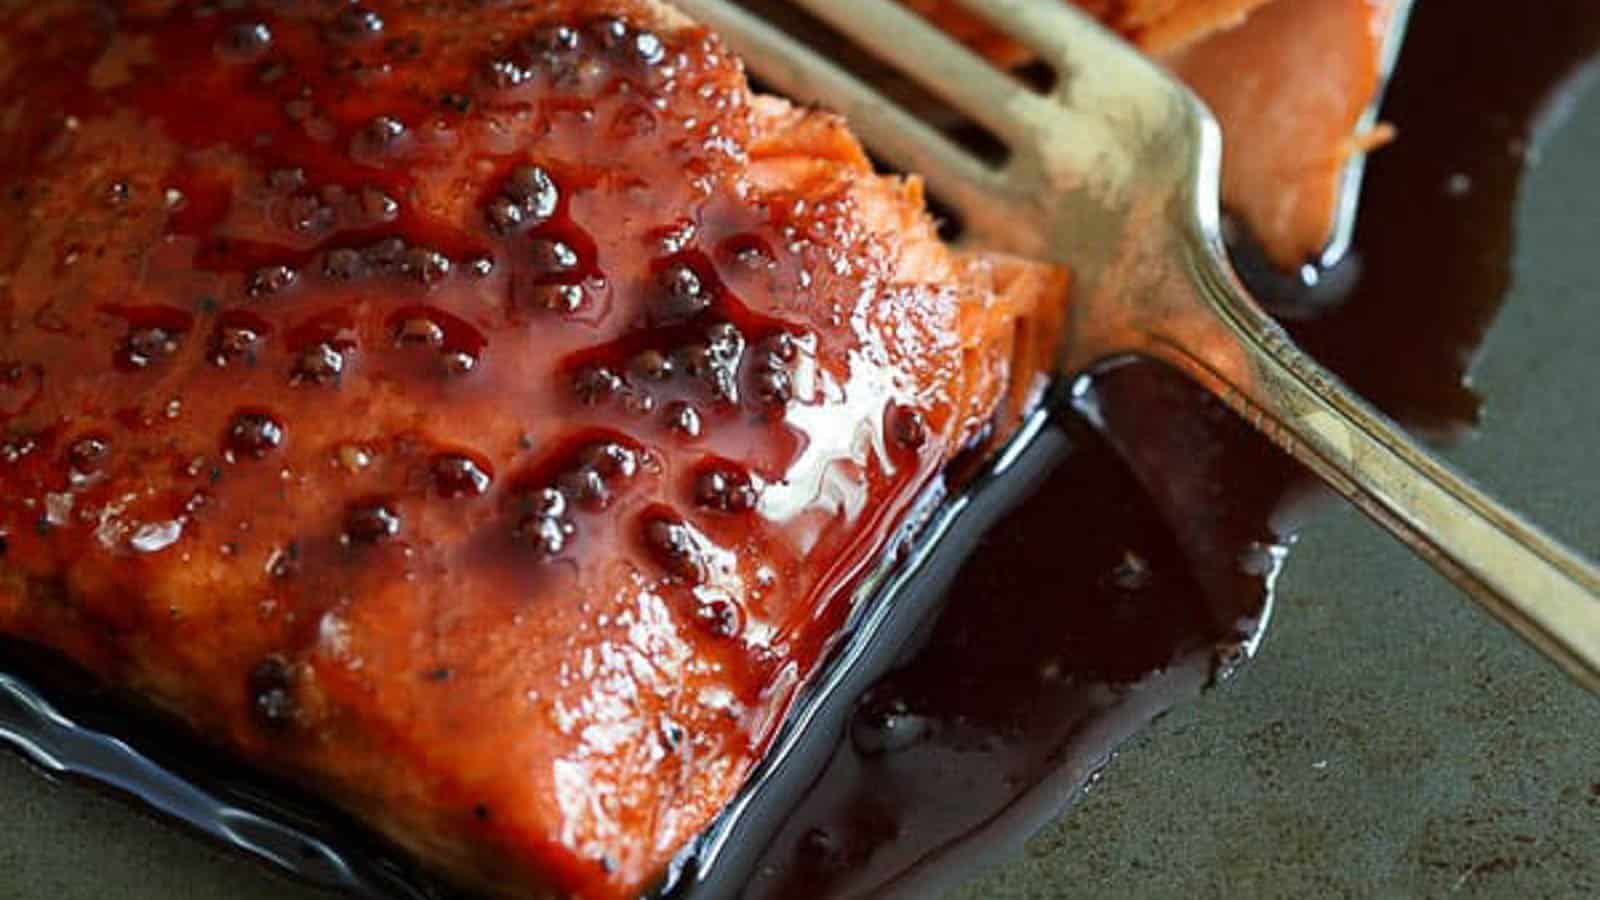 Cherry glazed salmon filet on a baking sheet with a fork.